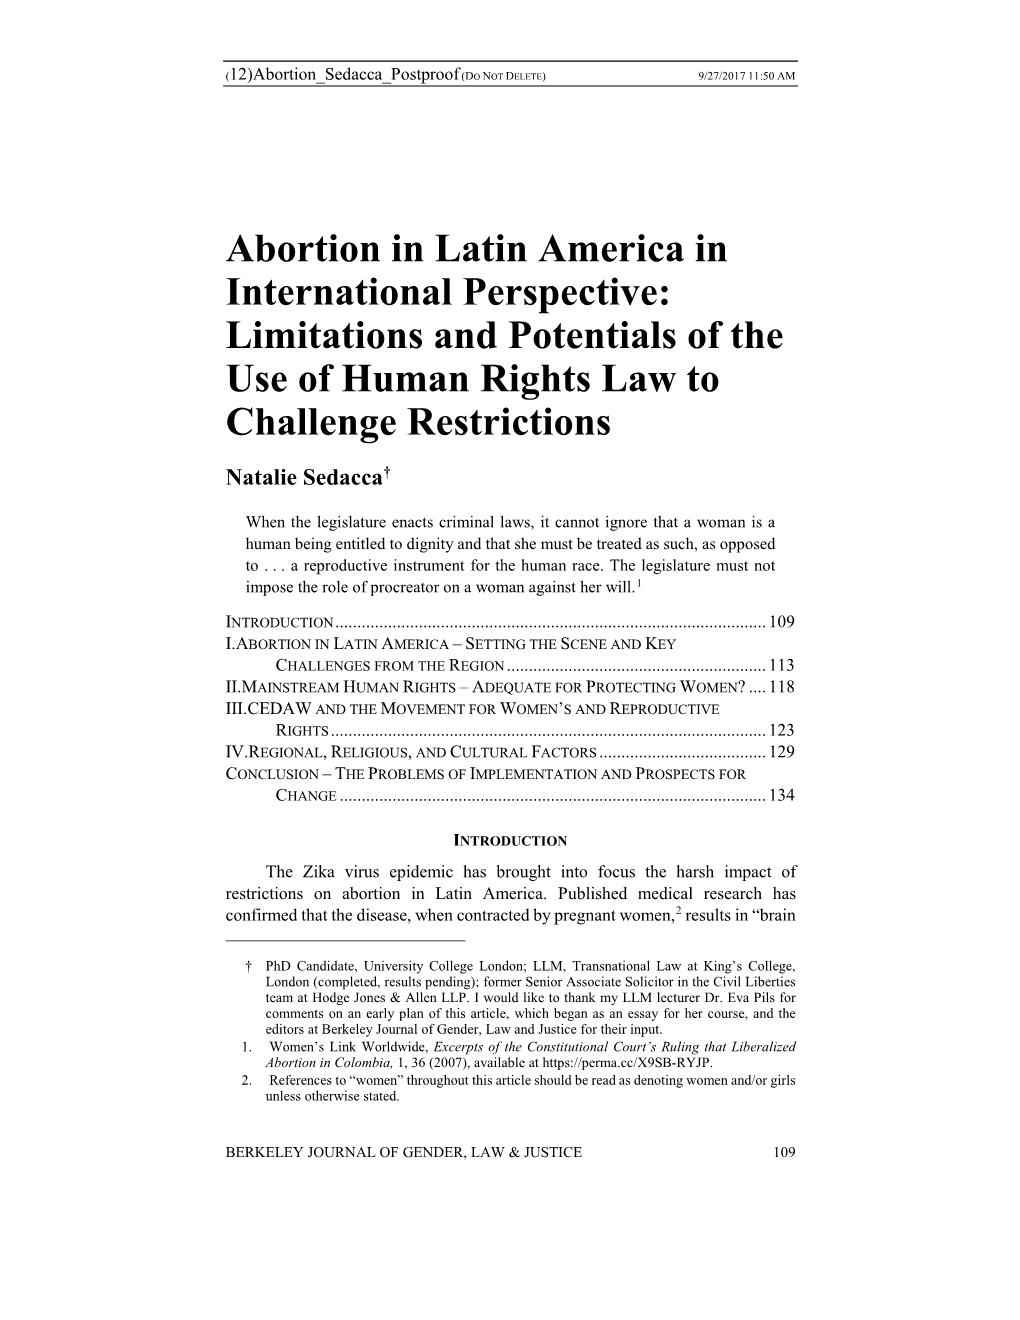 Abortion in Latin America in International Perspective: Limitations and Potentials of the Use of Human Rights Law to Challenge Restrictions Natalie Sedacca†